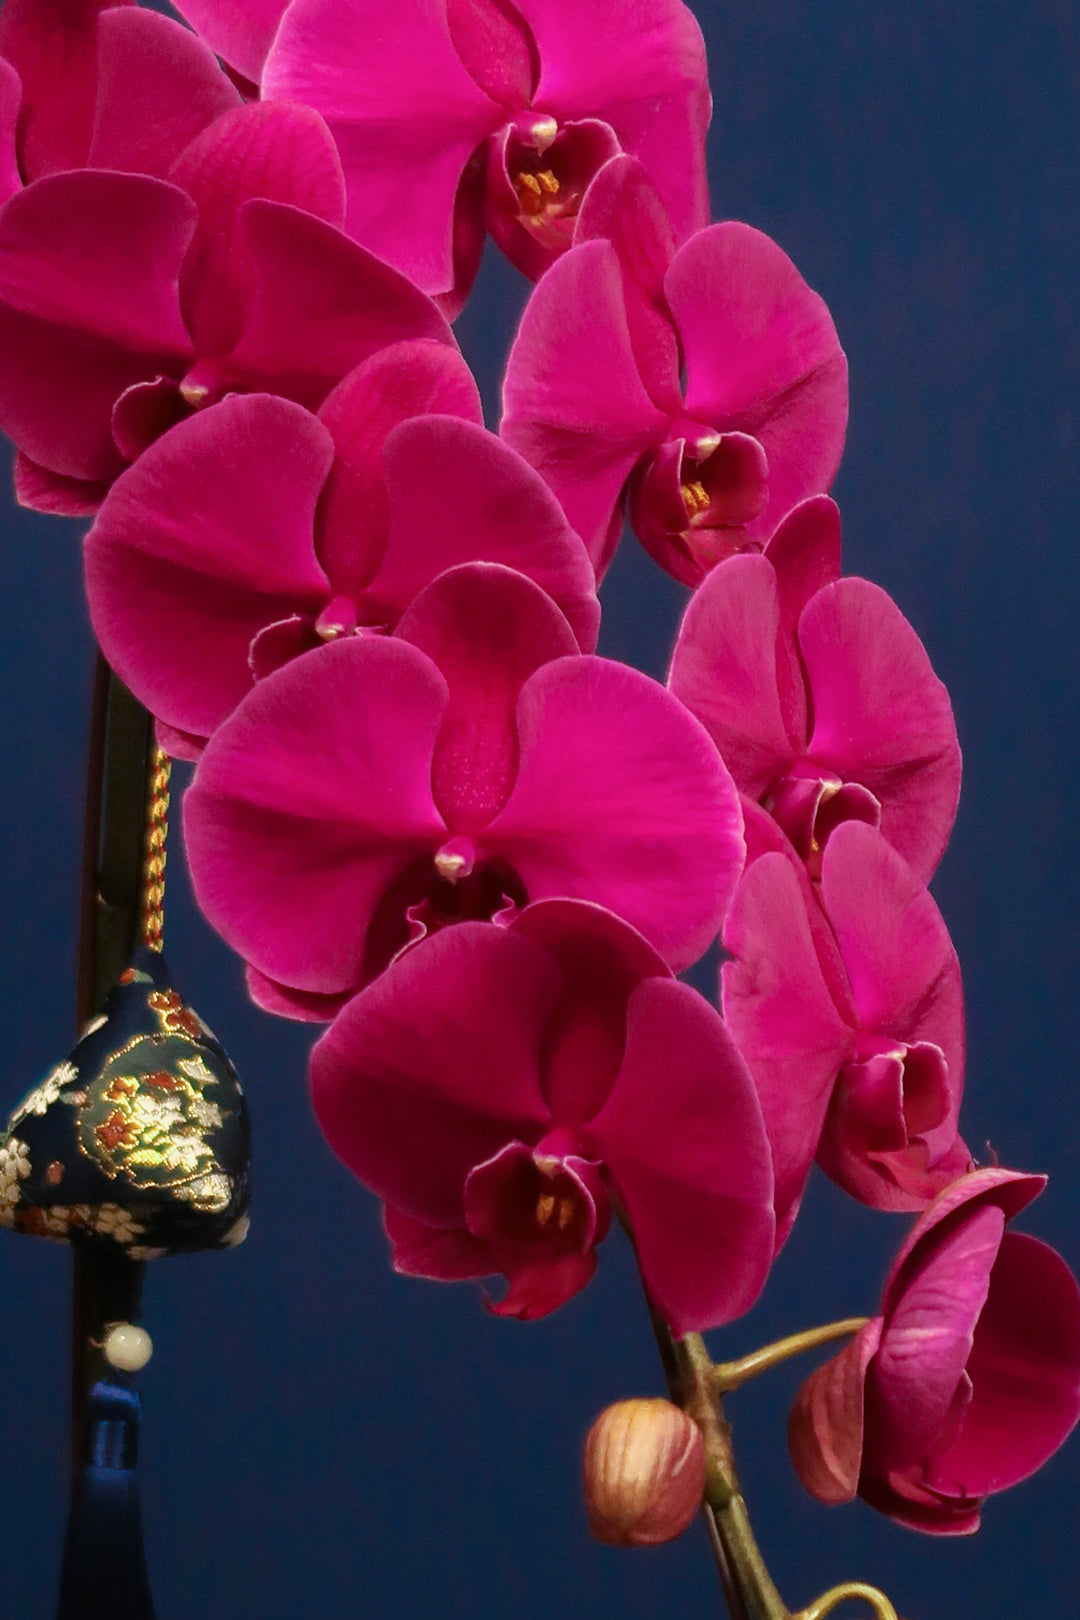 Supreme 'Dragon' Phalaenopsis Orchids - Red